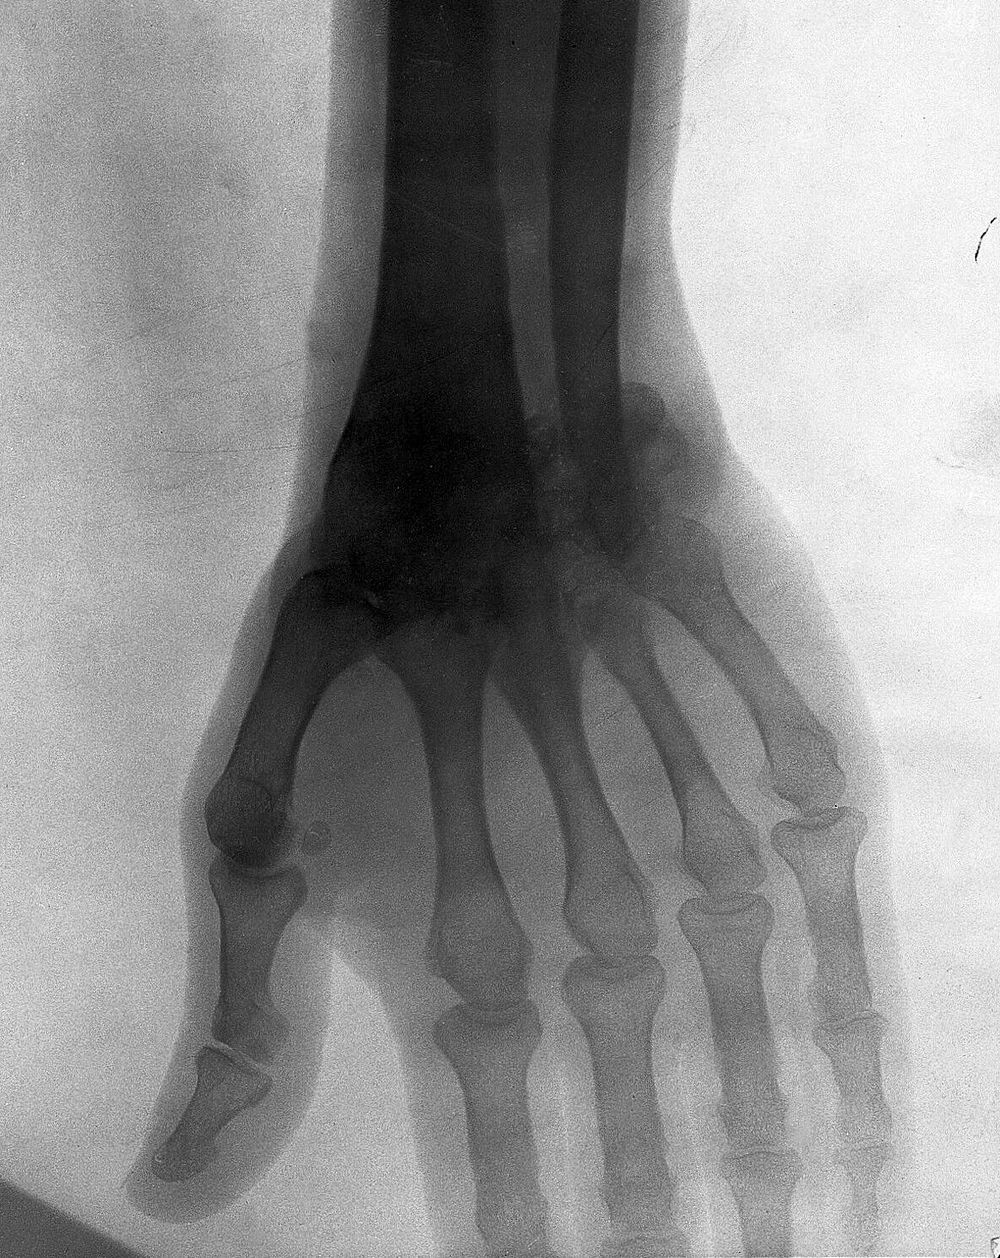 Bones of the hand of Sergeant Mather, possibly of 2nd Middlesex Regiment, showing tuberculous disease of the wrist.…